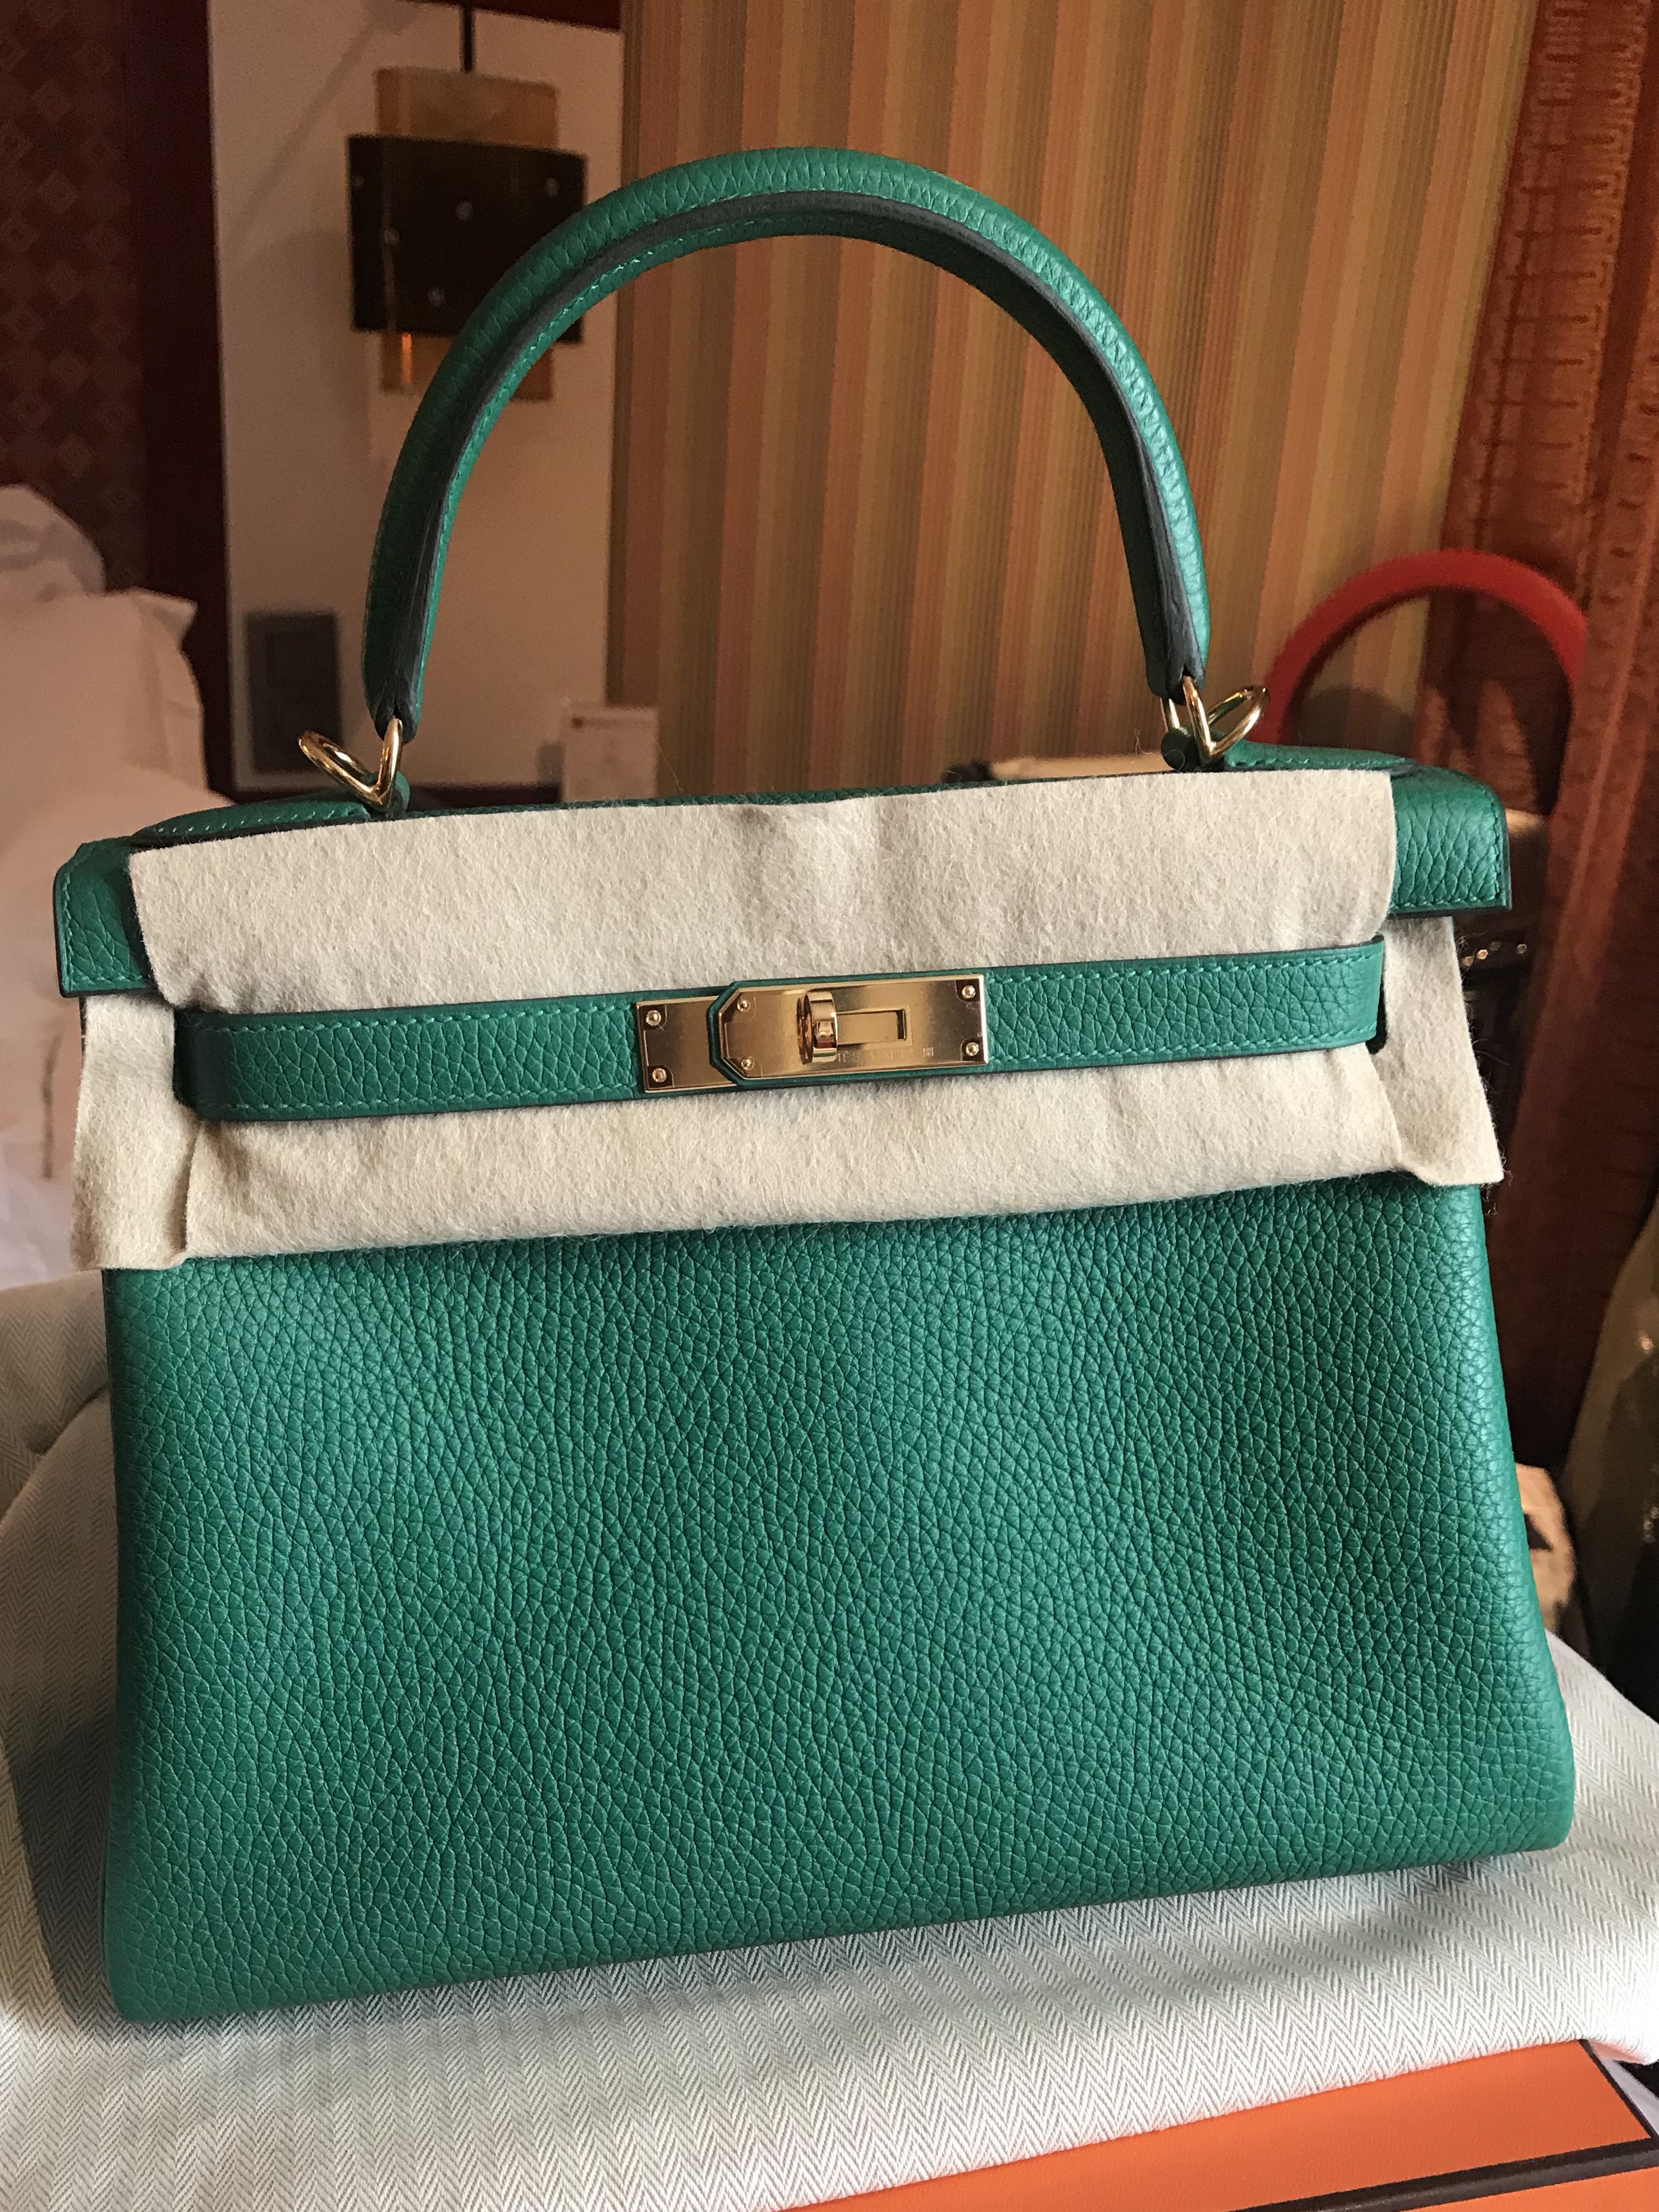 Hermès Kelly 28 In Vert Menthe Togo With Gold Hardware in Green